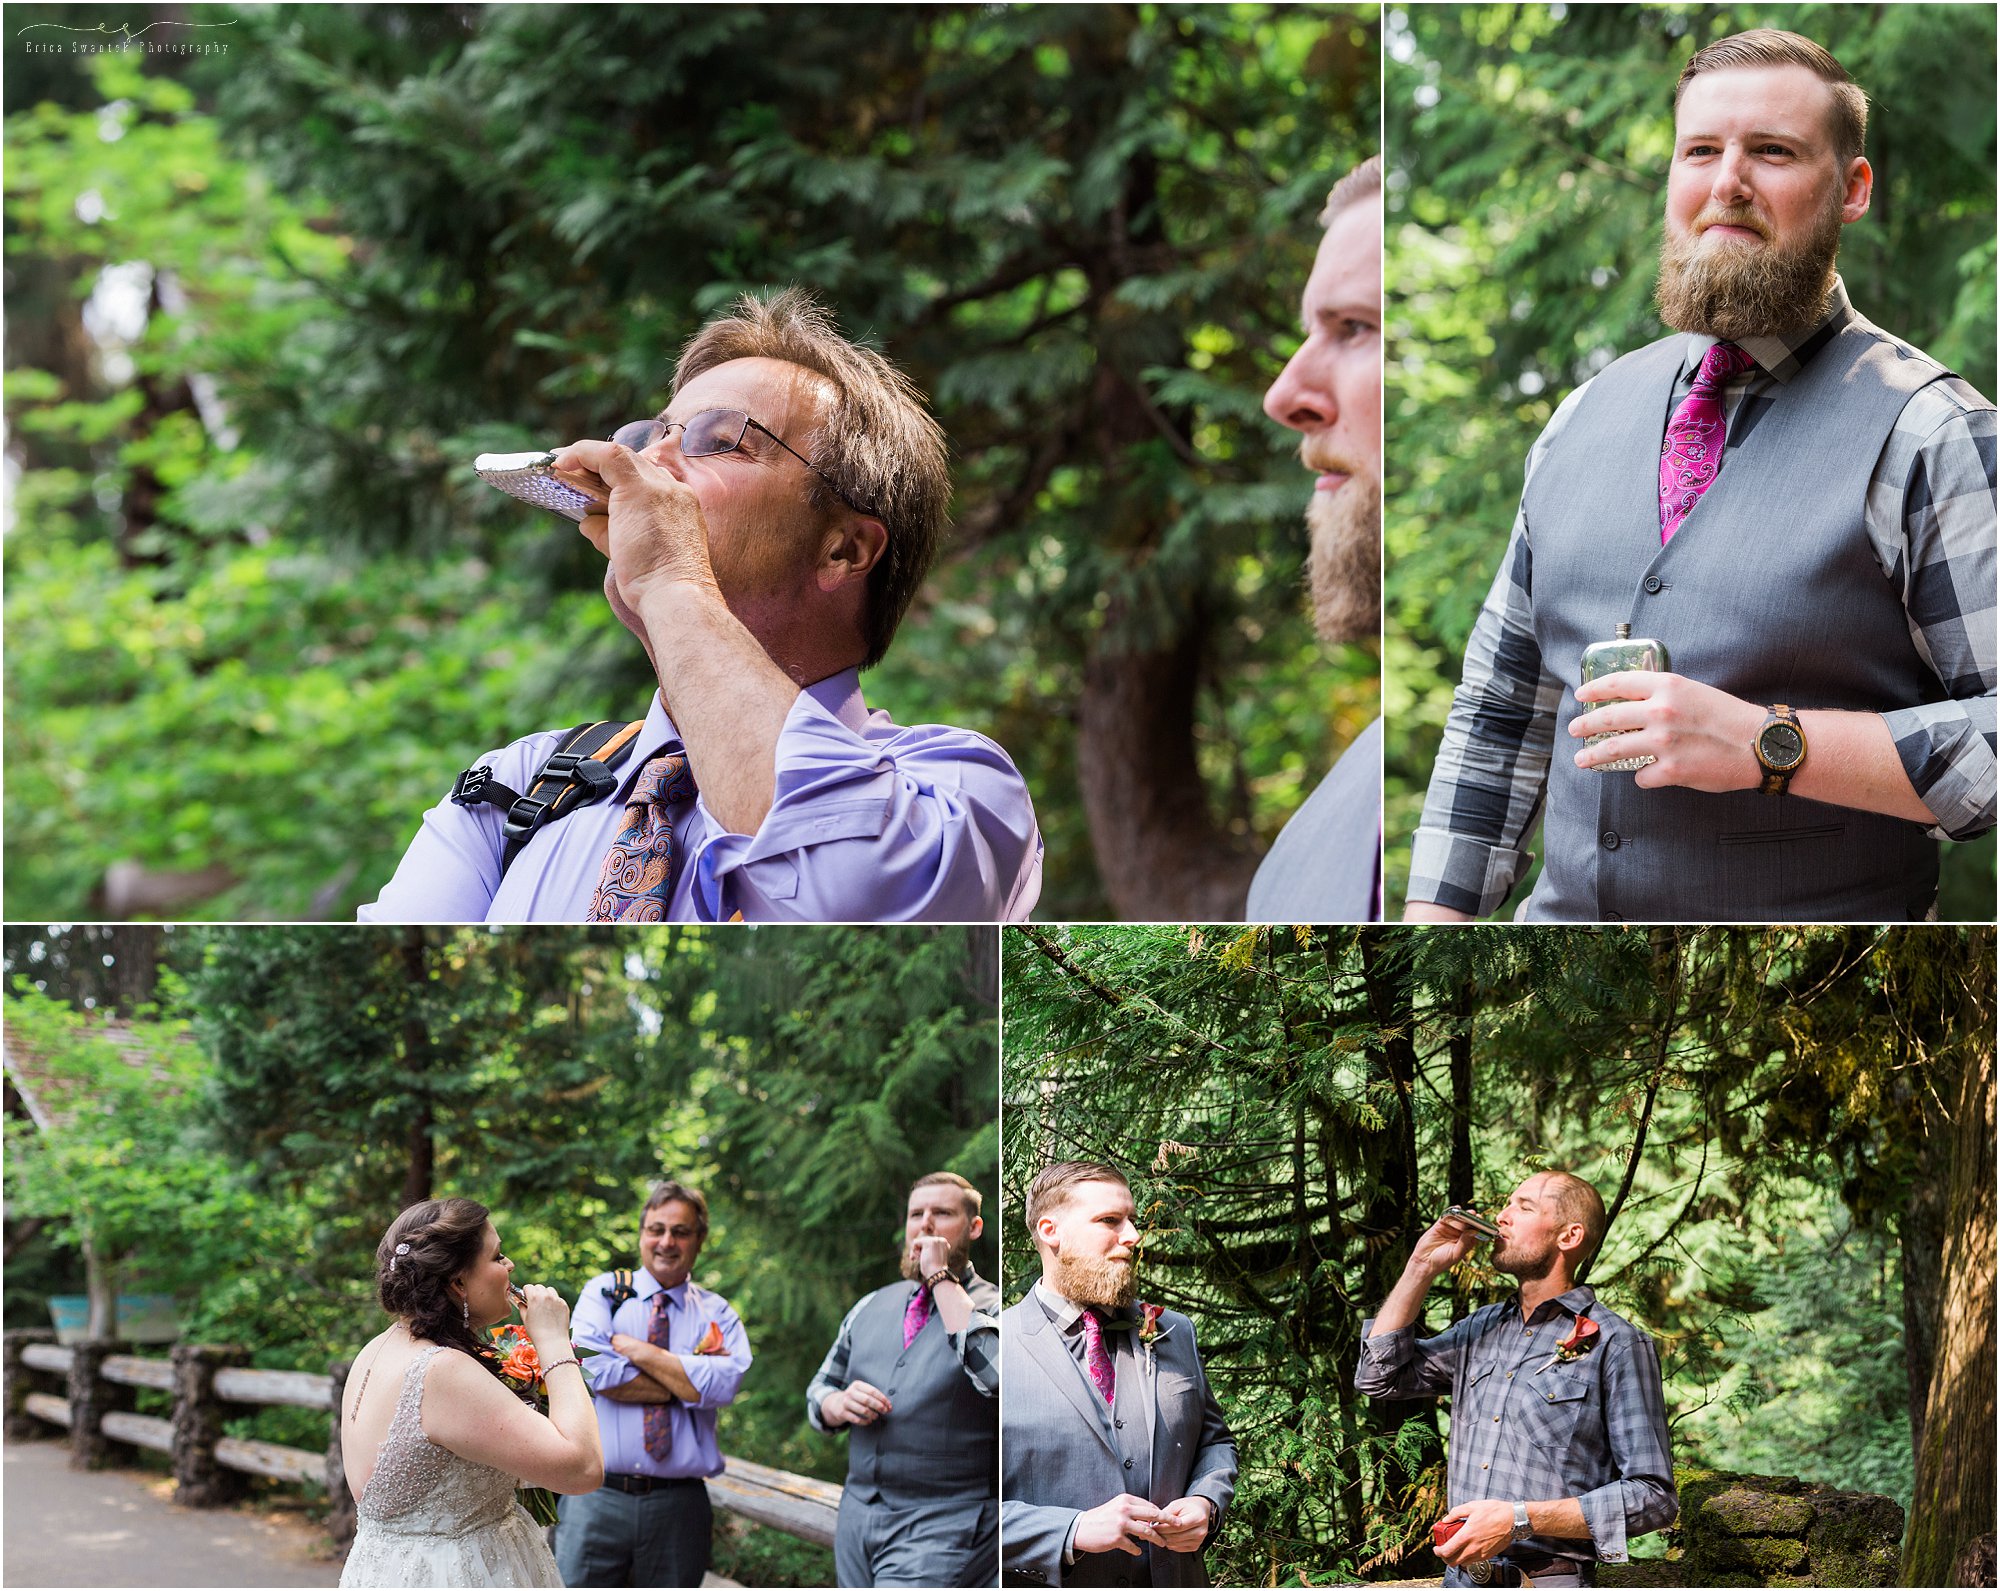 A pre wedding shot of whiskey to take the nerves away at this intimate Oregon waterfall wedding near Bend. | Erica Swantek Photography